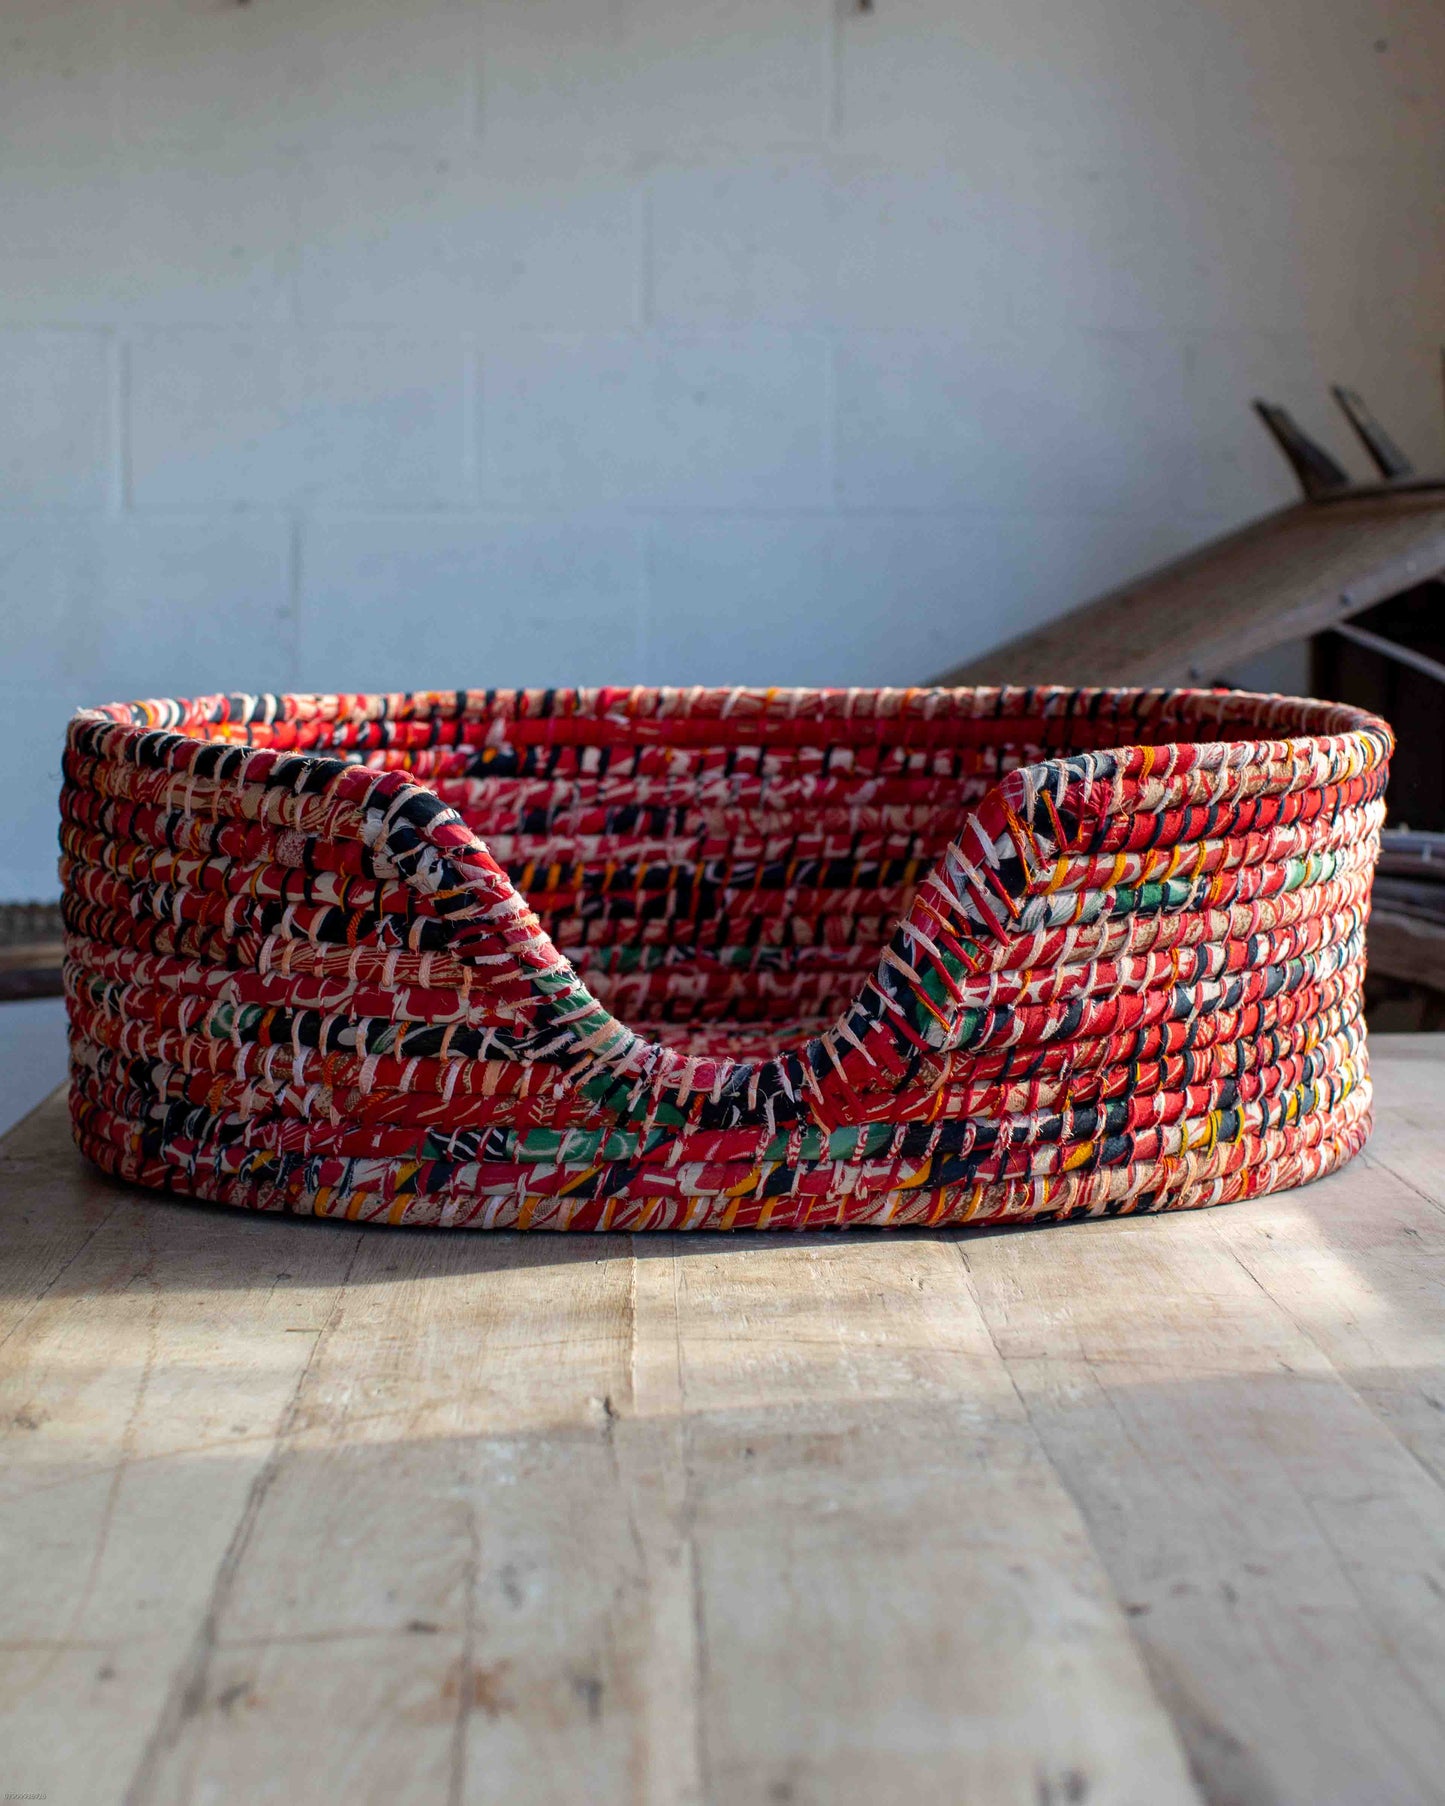 Load image into Gallery viewer, Large Recycled Sari Dog Baskets - 8
